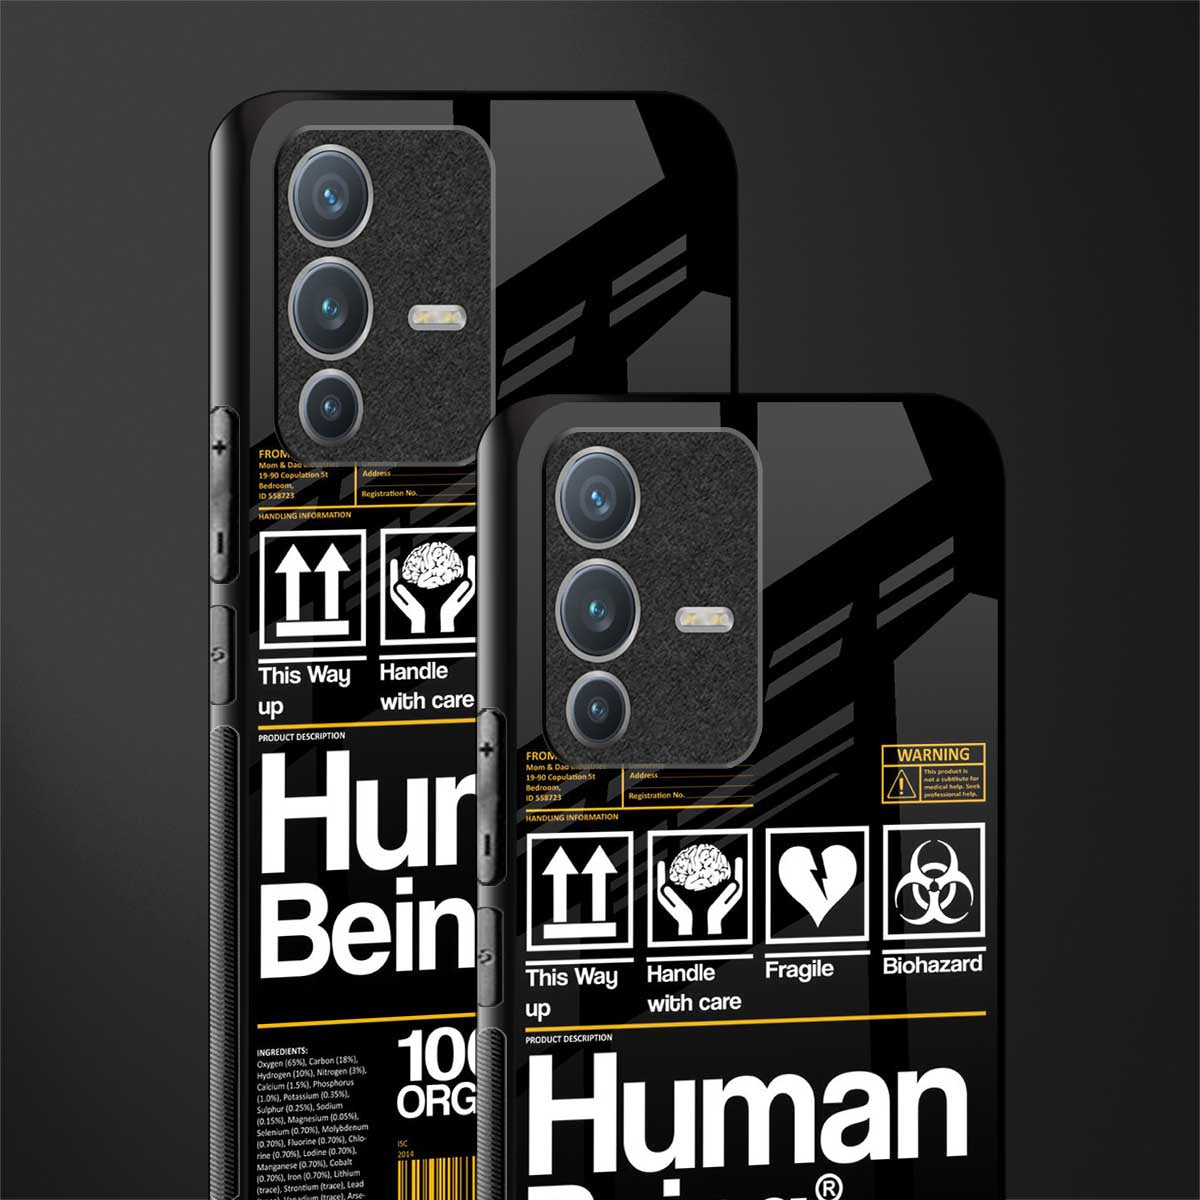 human being label phone cover for vivo v23 pro 5g